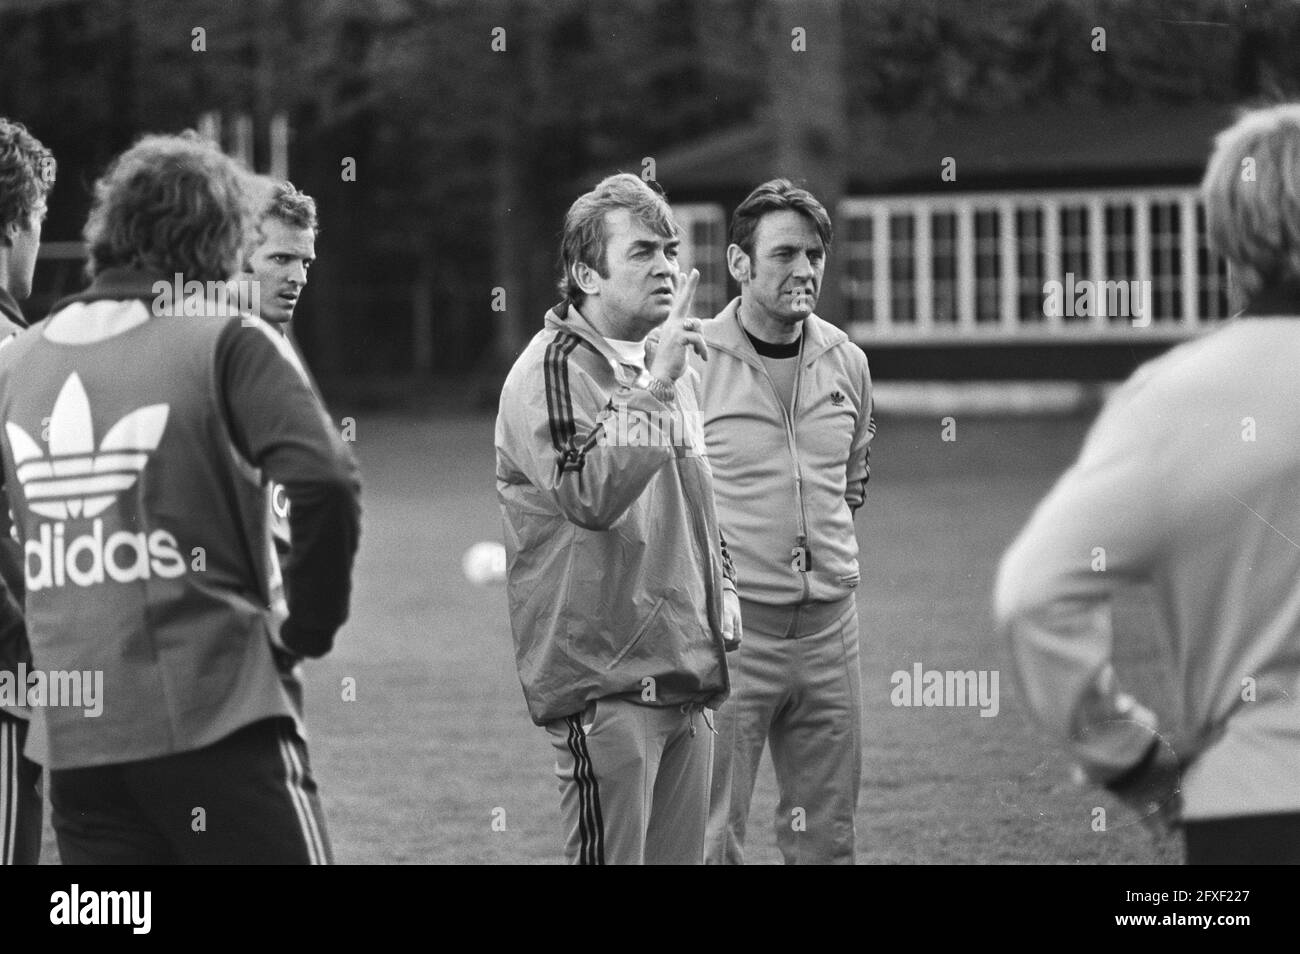 Training Dutch national team in Zeist; trainers Happel (l) and Zwartkruis, May 12, 1978, TRAINERS, sports, soccer, The Netherlands, 20th century press agency photo, news to remember, documentary, historic photography 1945-1990, visual stories, human history of the Twentieth Century, capturing moments in time Stock Photo